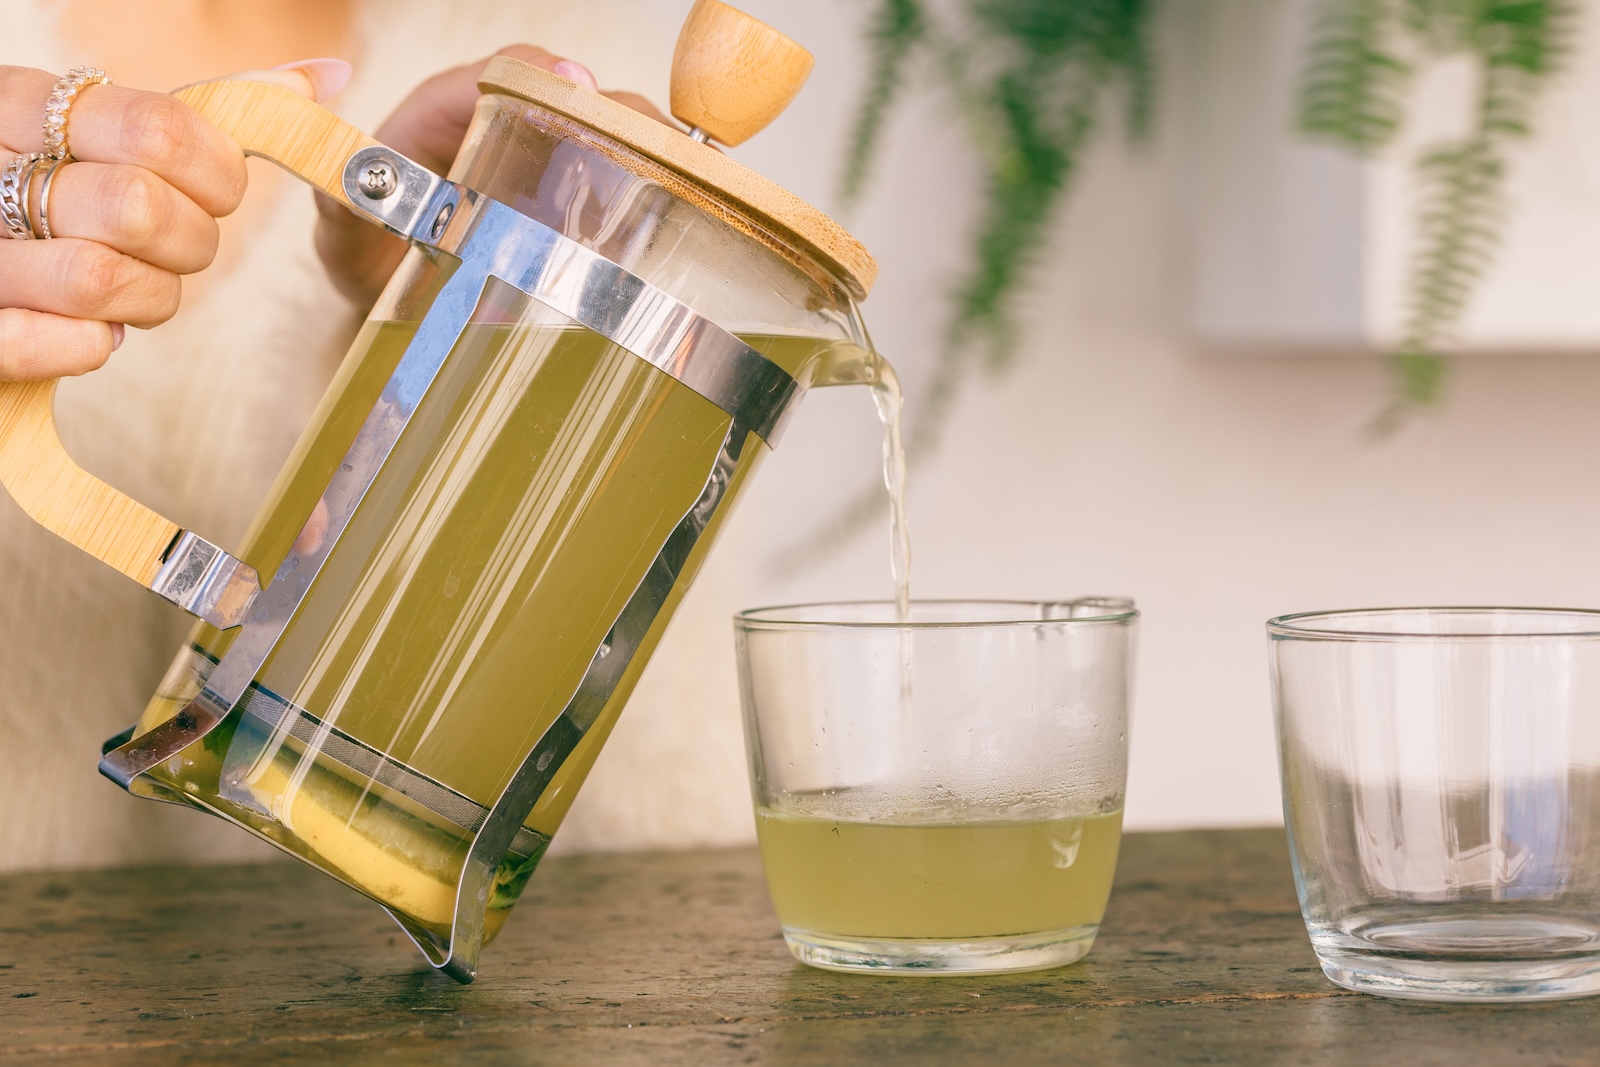 Herbal tea being poured into glasses from a french press.